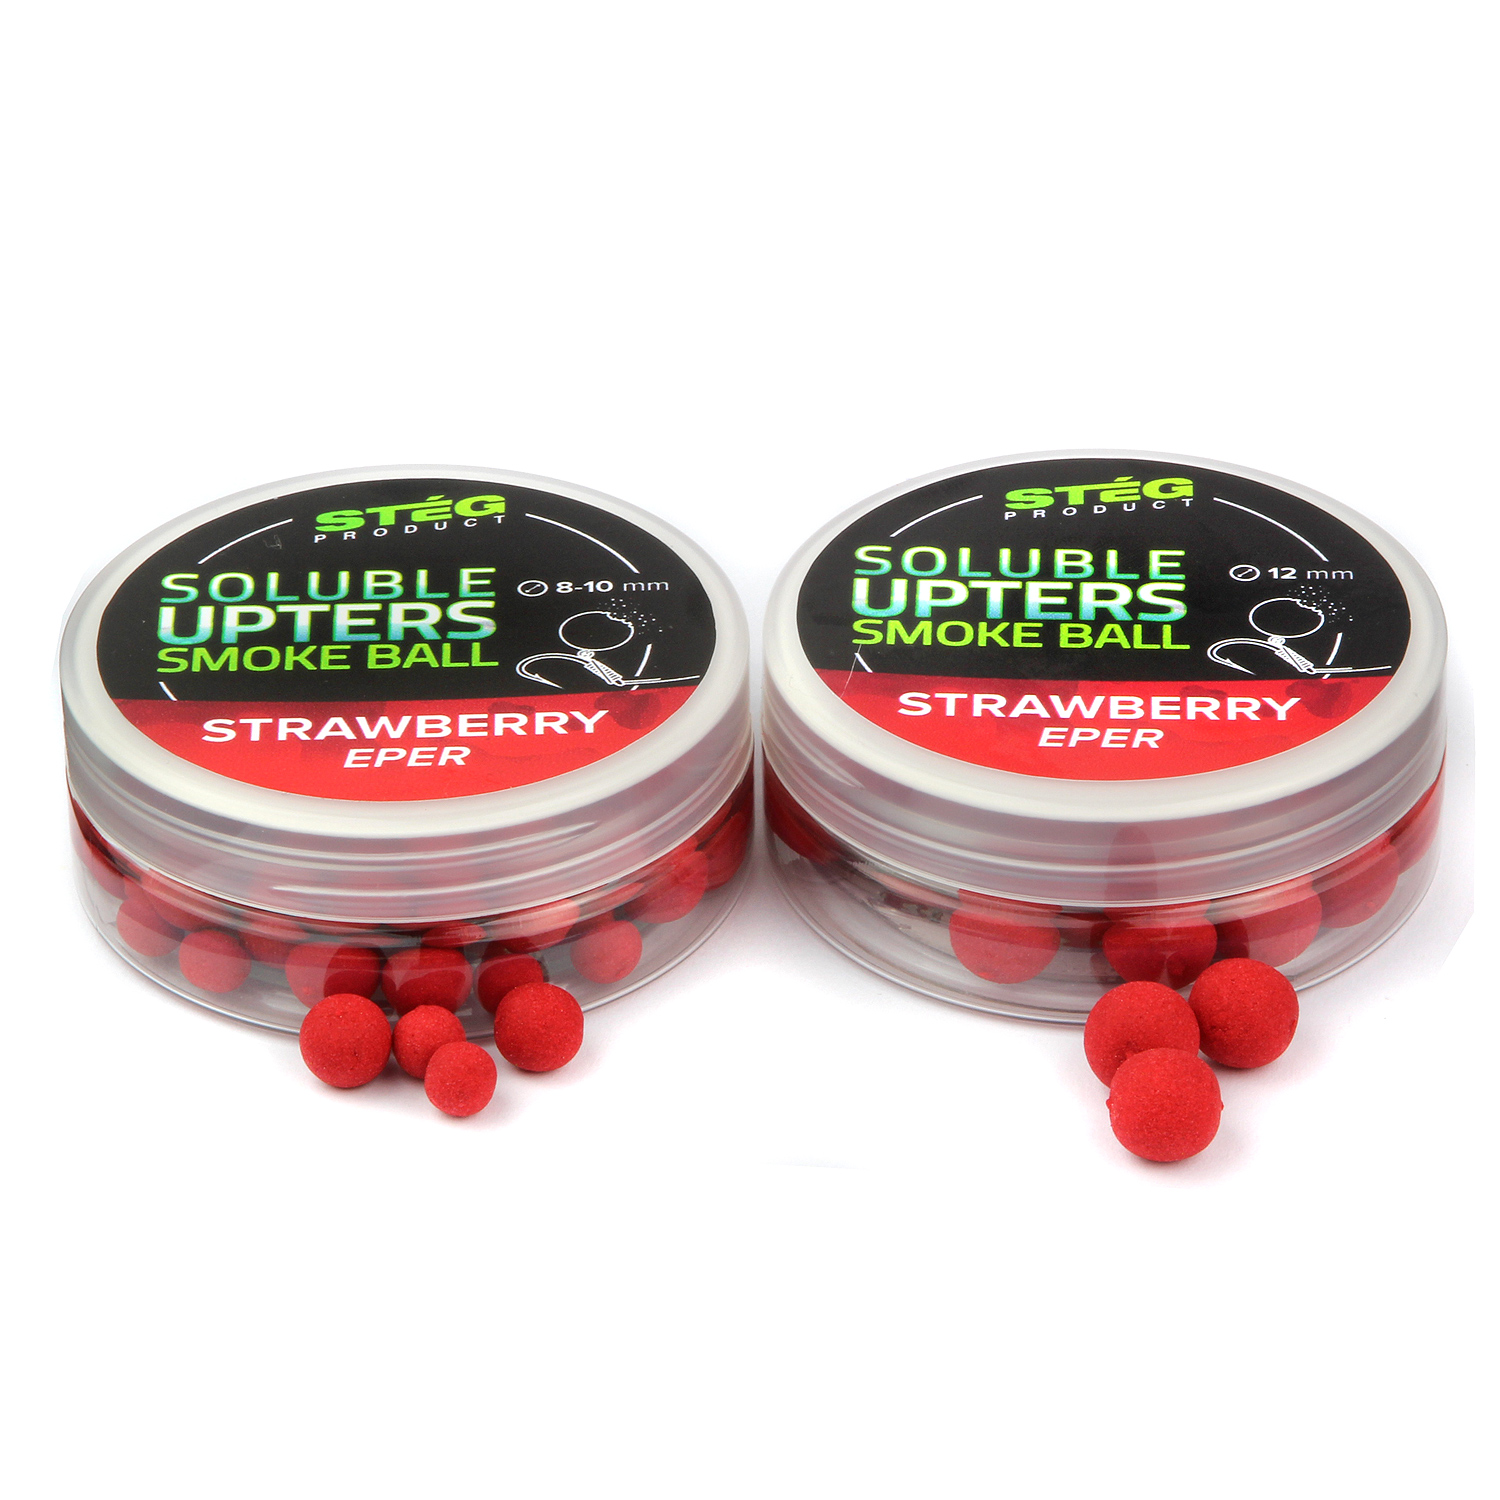 Stg Product Soluble Upters Smoke Ball 8-10mm Strawberry 30g